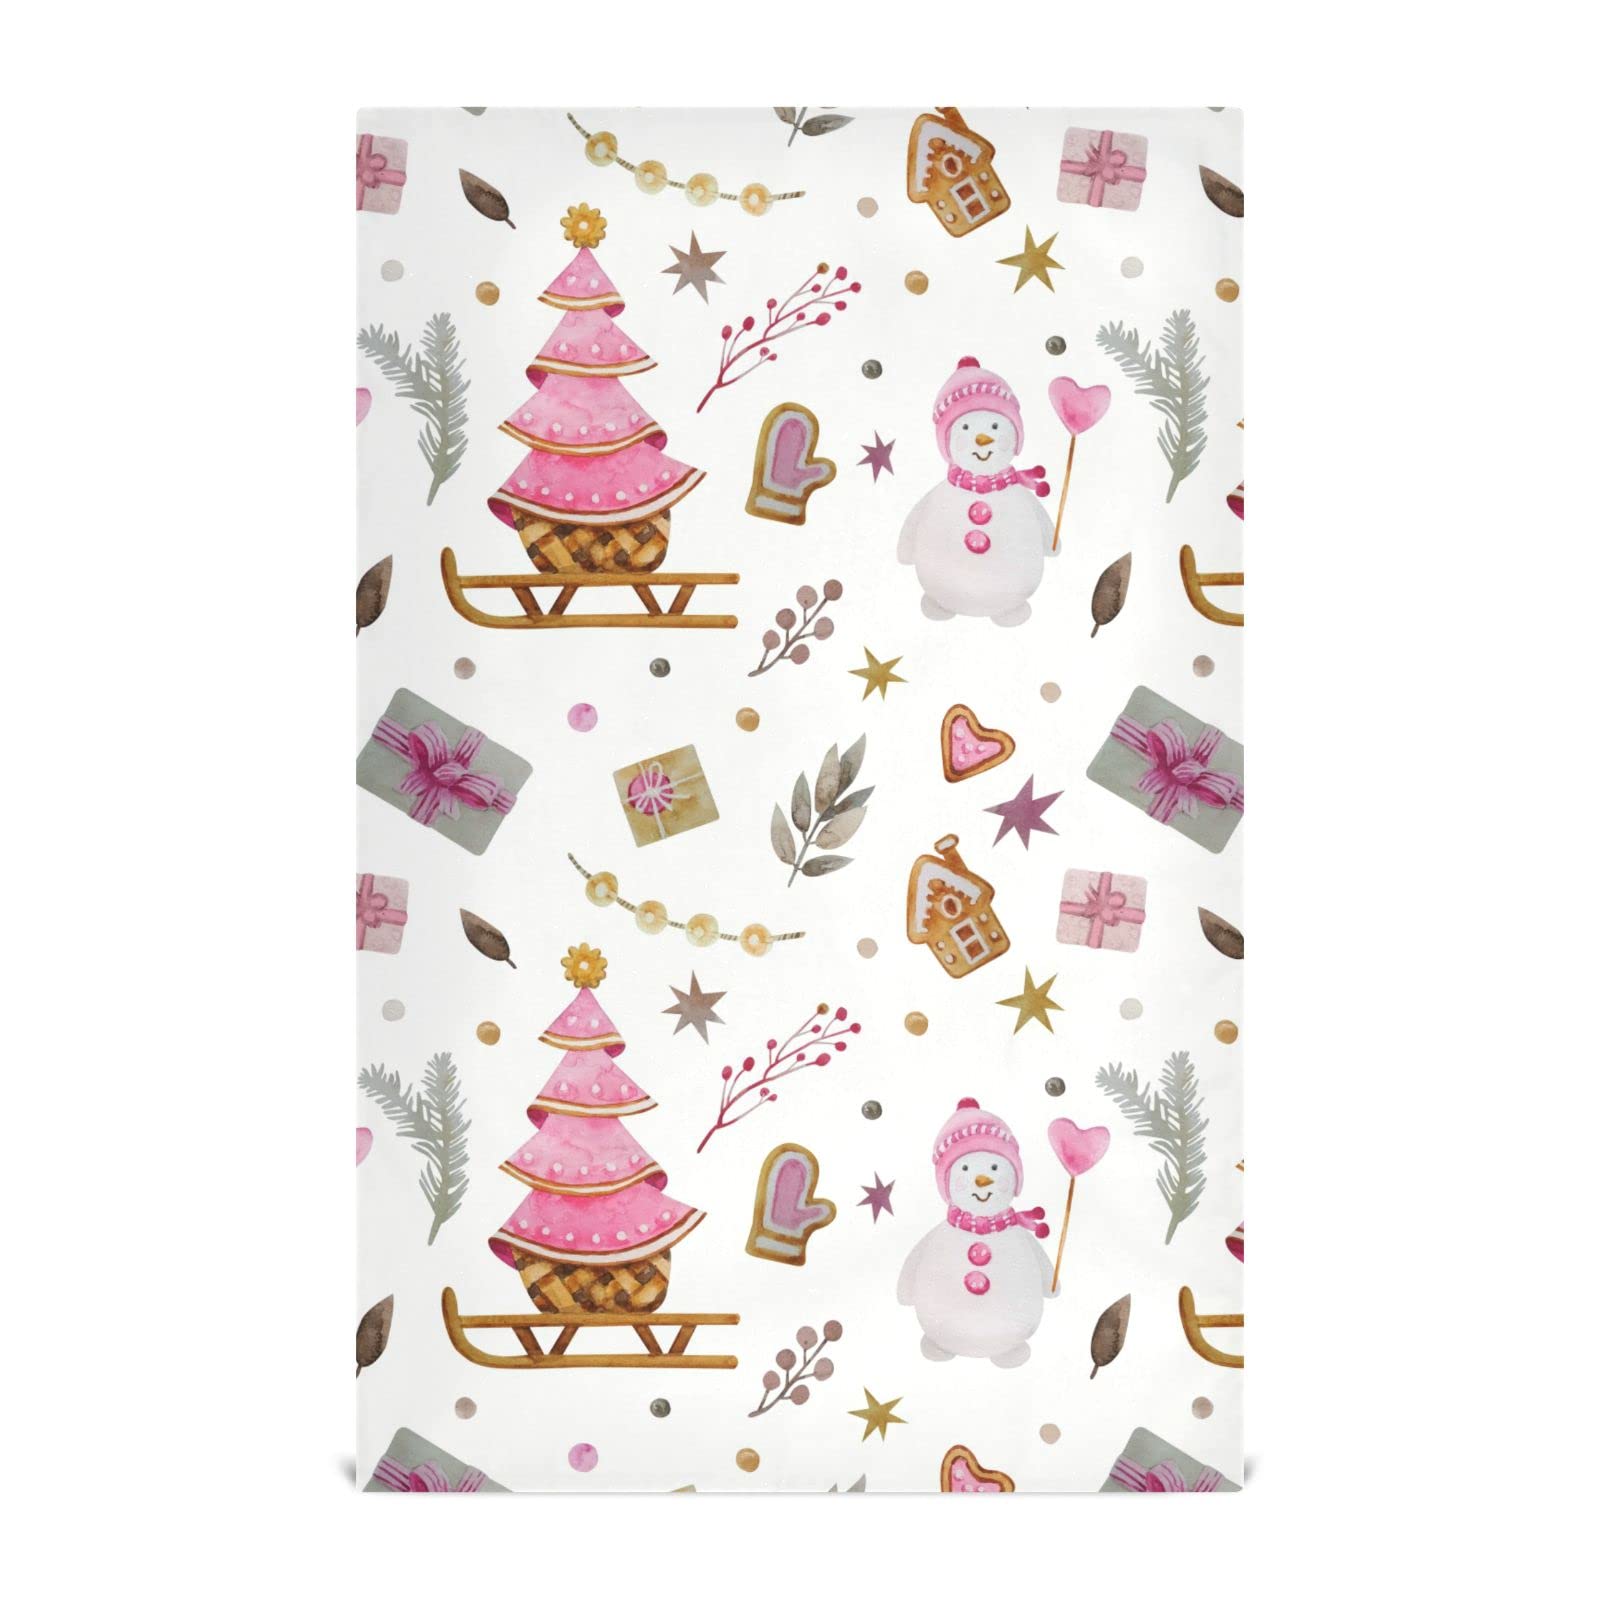 Exnundod Winter Kitchen Dish Towels Pink Snowman Set of 4 Hanging Dish Hand Towel Pretty Pattern Reusable Cleaning Dishcloth for Bathroom Bar Drying Wiping Decor 18x28inch